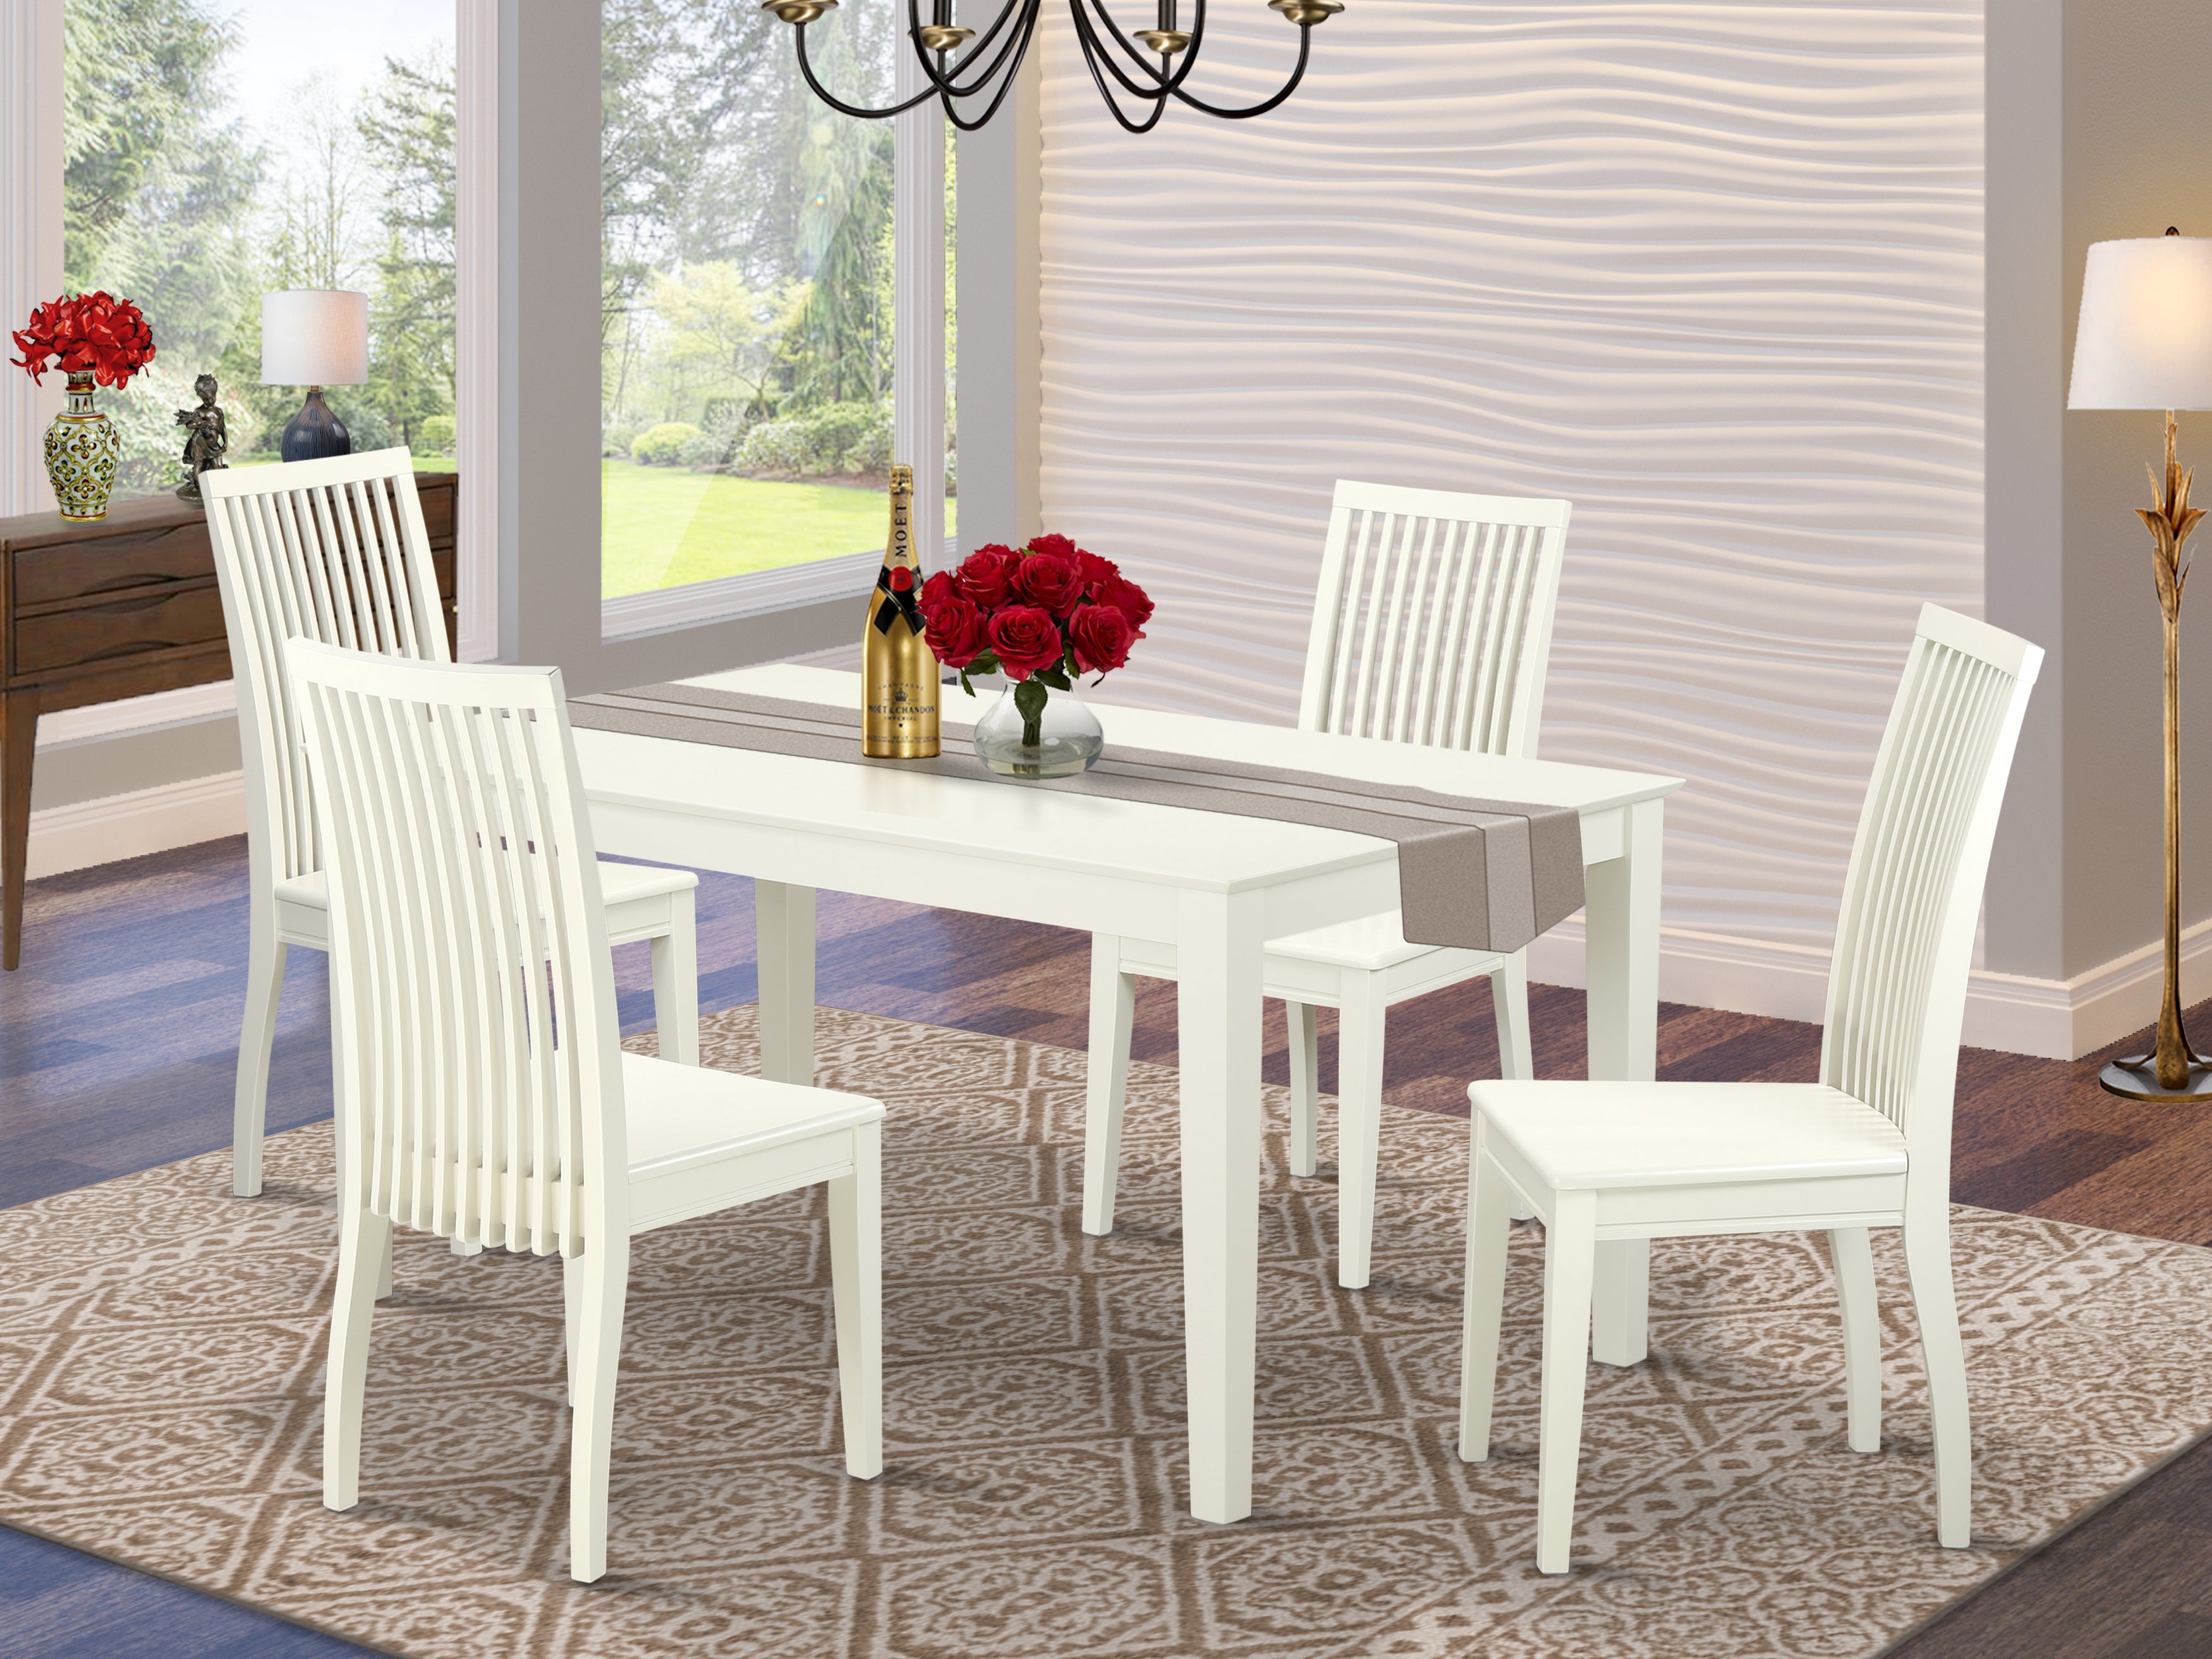 CAIP5-LWH-W 5 Piece dining table set for 4- Dining table and 4 Wood seat dining chairs